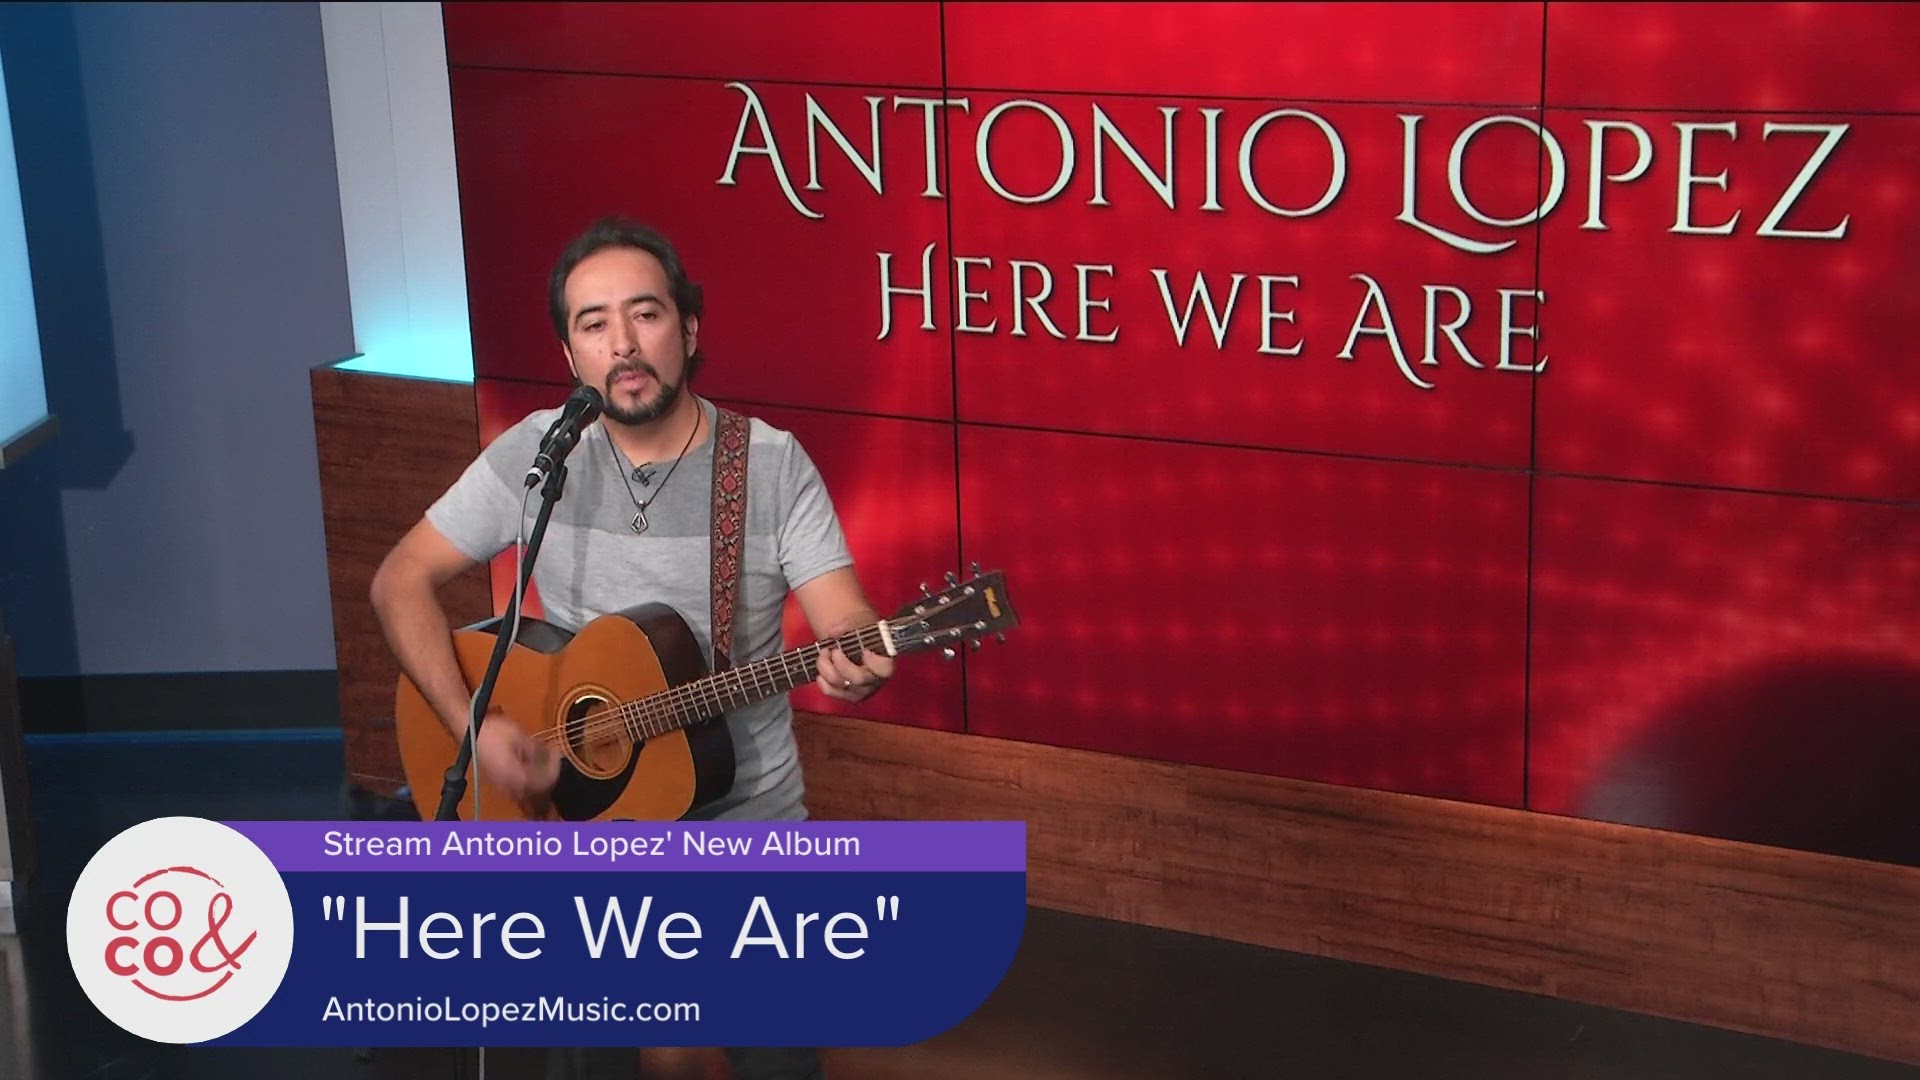 'Here We Are' is streaming on all platforms now. Learn more about Antonio at AntonioLopezMusic.com.